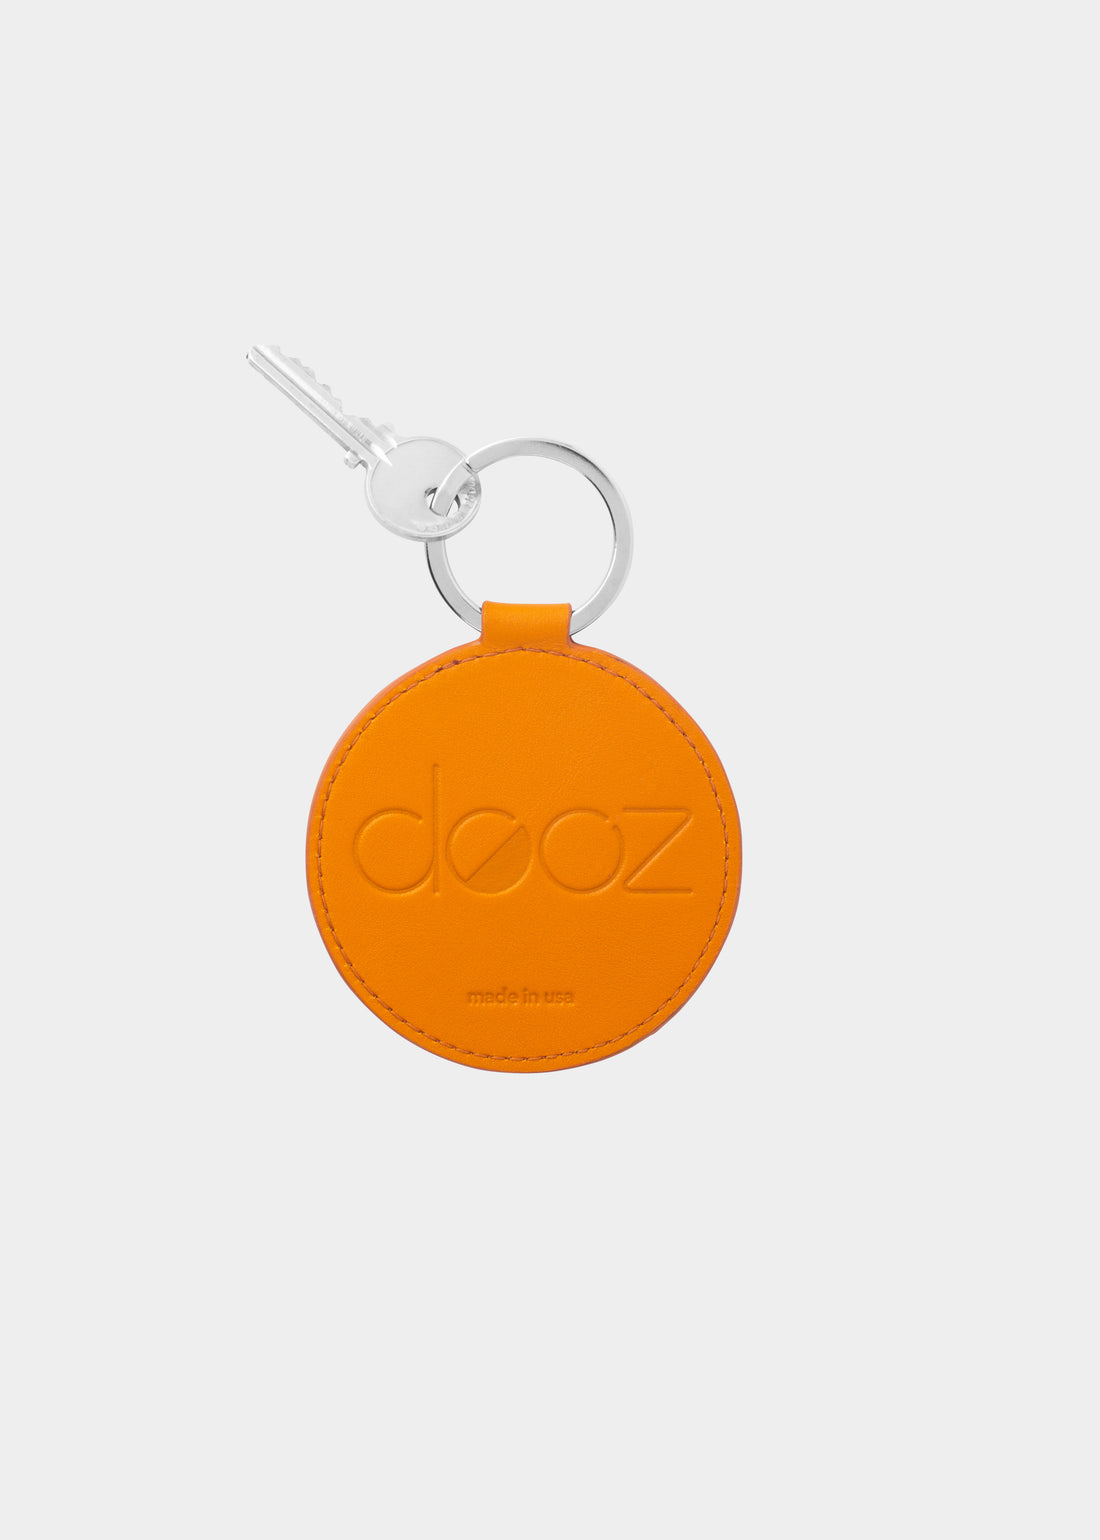 Dooz Gemini golden leather keychain with embossed logo and silver keyring